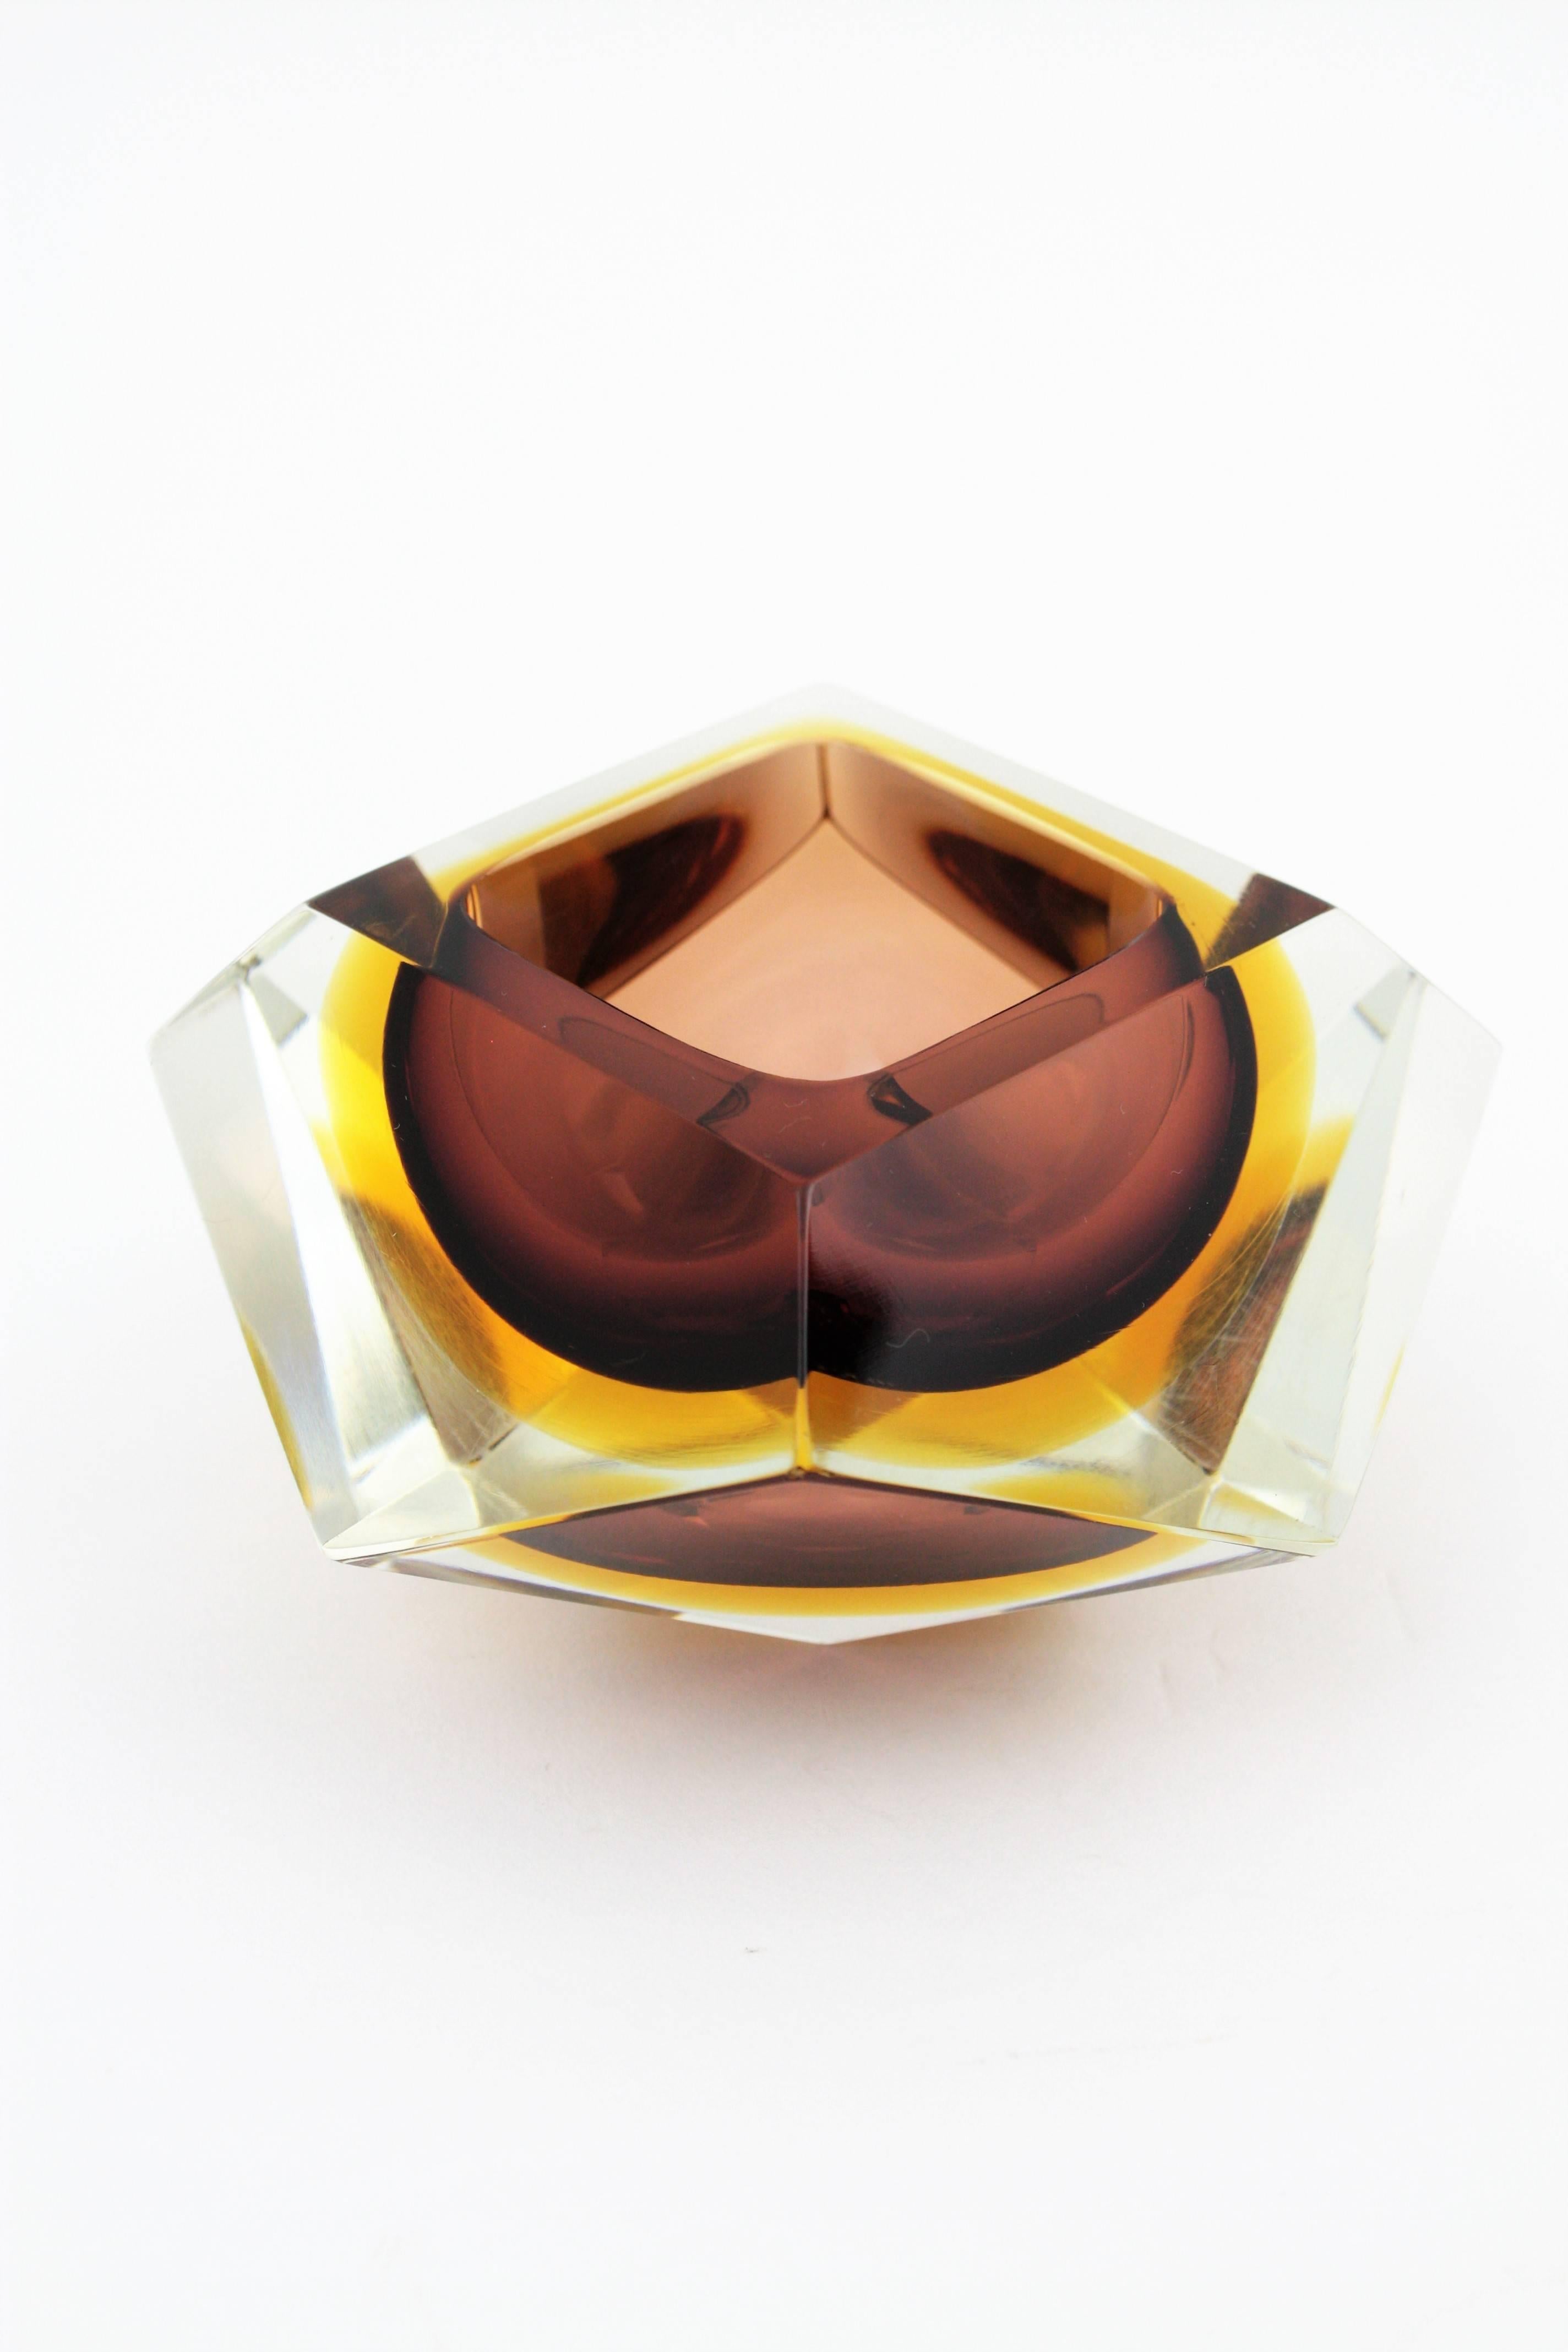 20th Century Large Flavio Poli Brown & Amber Sommerso Diamond Shape Faceted Murano Glass Bowl